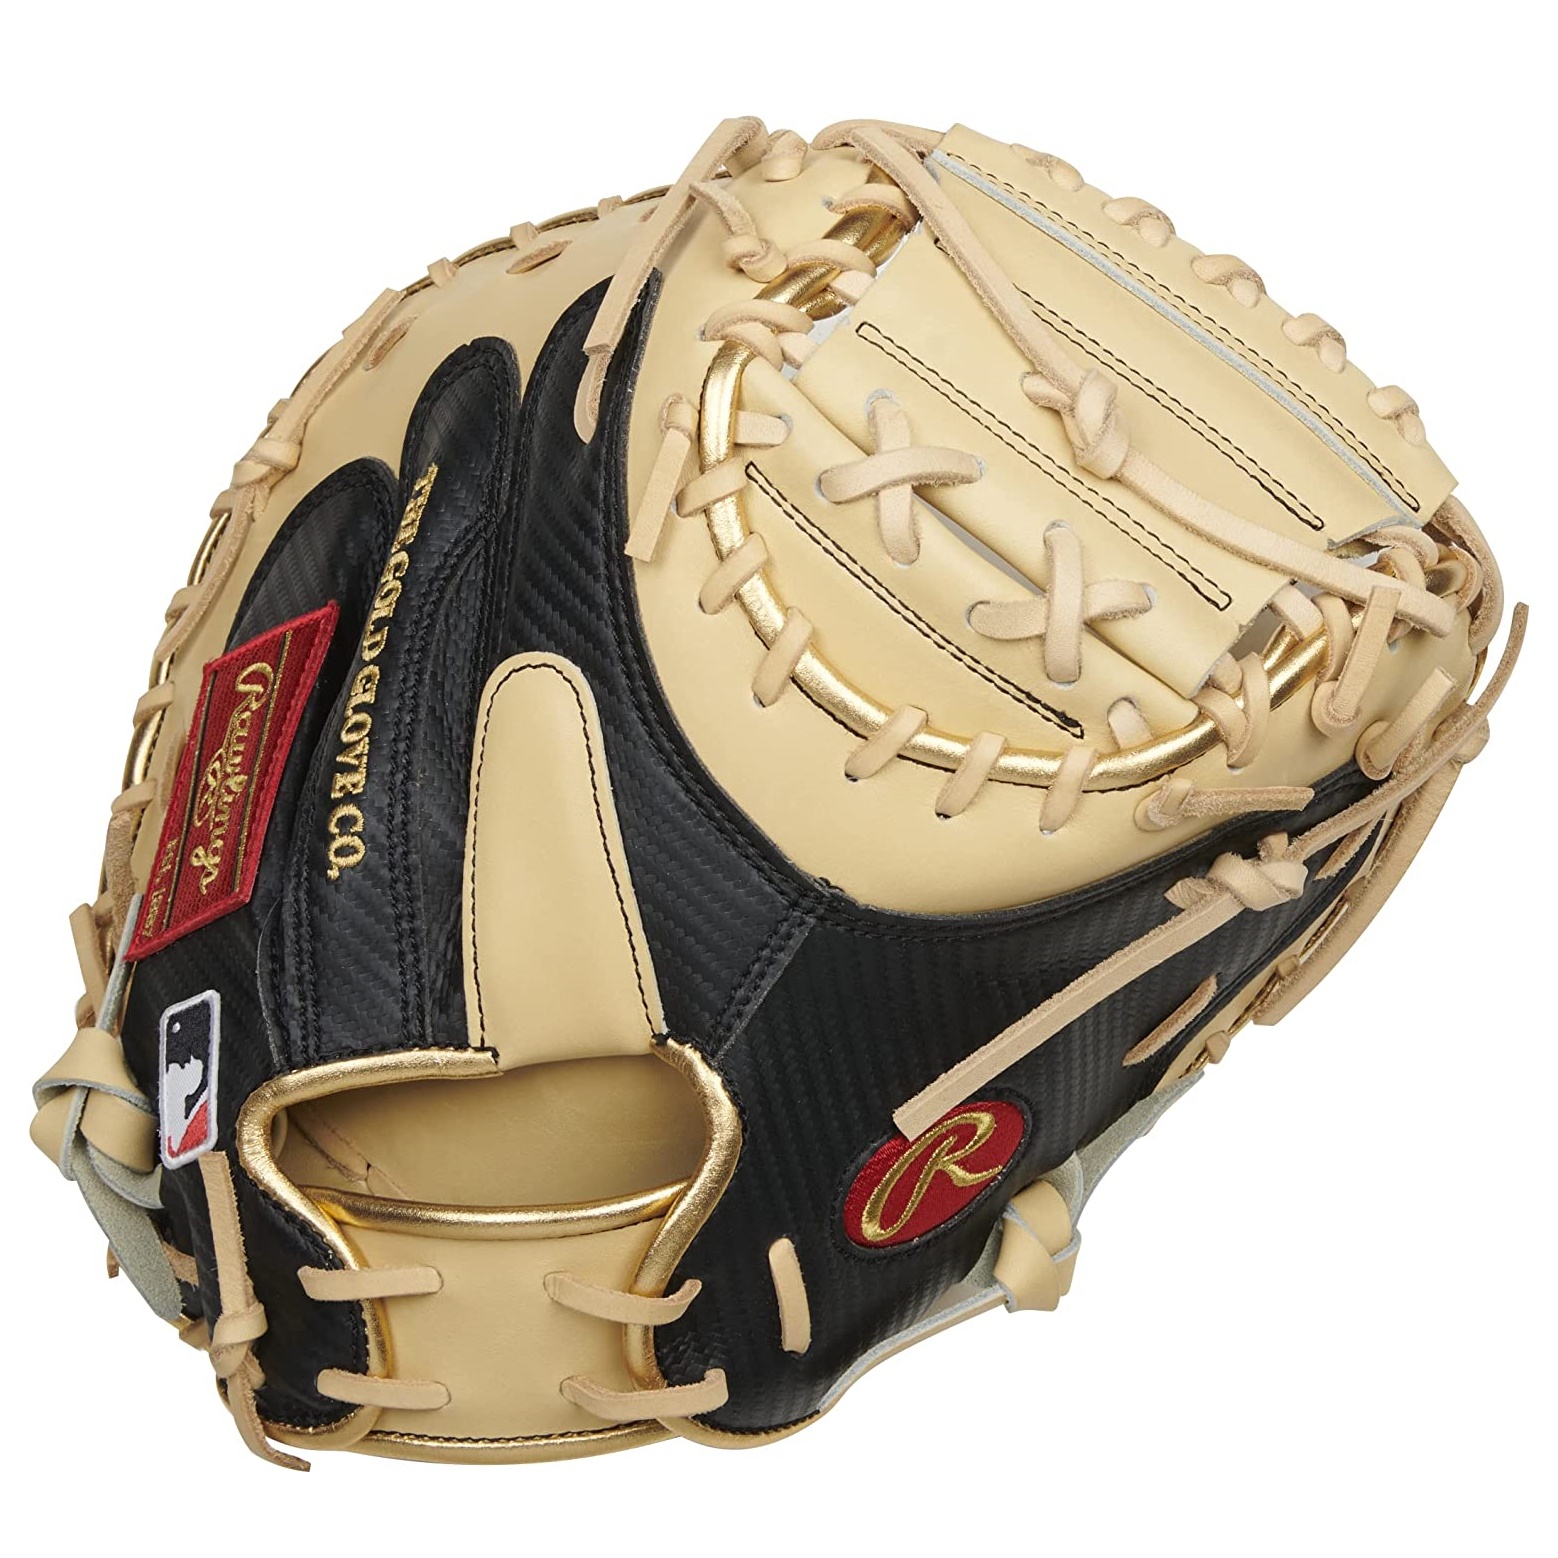 The Rawlings 34-inch Camel and Black Catcher's Mitt is a high-quality and durable catchers mitt designed exclusively for use by catchers. With its impressive features and construction, it is an excellent choice for players at the high school to pro level. One notable feature of this glove is its Hypershell back, which is made from a carbon weave material. This innovative backing not only promotes exceptional durability but also significantly reduces the weight of the glove. In fact, it is approximately 15% lighter than traditional gloves, making it easier to maneuver and control. The Rawlings 34-inch Camel and Black Catcher's Mitt has a fully closed webbing design, which provides added support and security when catching fast pitches. The glove is constructed from top-grade U.S. steerhide, ensuring excellent overall quality and longevity. To enhance comfort, Rawlings has included a deertanned cowhide palm lining. This feature not only improves the feel inside the glove but also helps reduce hand fatigue during extended periods of use. The glove also features a padded thumb sleeve, which adds an extra layer of protection and comfort for the thumb. The break-in process for this mitt may take some time, as it has a stiffer feel initially. However, with approximately 60% of the break-in process to be done by the player, the glove will gradually mold to the player's hand, resulting in a customized fit. In terms of sizing, the Rawlings 34-inch Camel and Black Catcher's Mitt is designed to fit high school-to-adult-sized hands. It features Rawlings' standard fit, which includes regular finger stalls and a 7-inch to 7.5-inch wrist opening. This ensures a secure and comfortable fit for most players. The colorway of this glove is a visually appealing combination of blonde and black, which adds a touch of style to the traditional catcher's mitt design. The glove also incorporates pro-grade leather laces, which enhance durability and strength, ensuring that the glove can withstand the rigors of intense gameplay. Additional features include an index finger pad on the shell backing, providing extra protection and comfort for the player's hand. The glove has a conventional open back, and it also includes thermoformed padding for the back of the wrist, further enhancing comfort and support while wearing the glove. The Rawlings 34-inch Camel and Black Catcher's Mitt with Hypershell back is a top-quality glove designed for serious catchers. Its durable construction, comfortable fit, and innovative features make it a reliable and stylish choice for players at the high school to adult level.